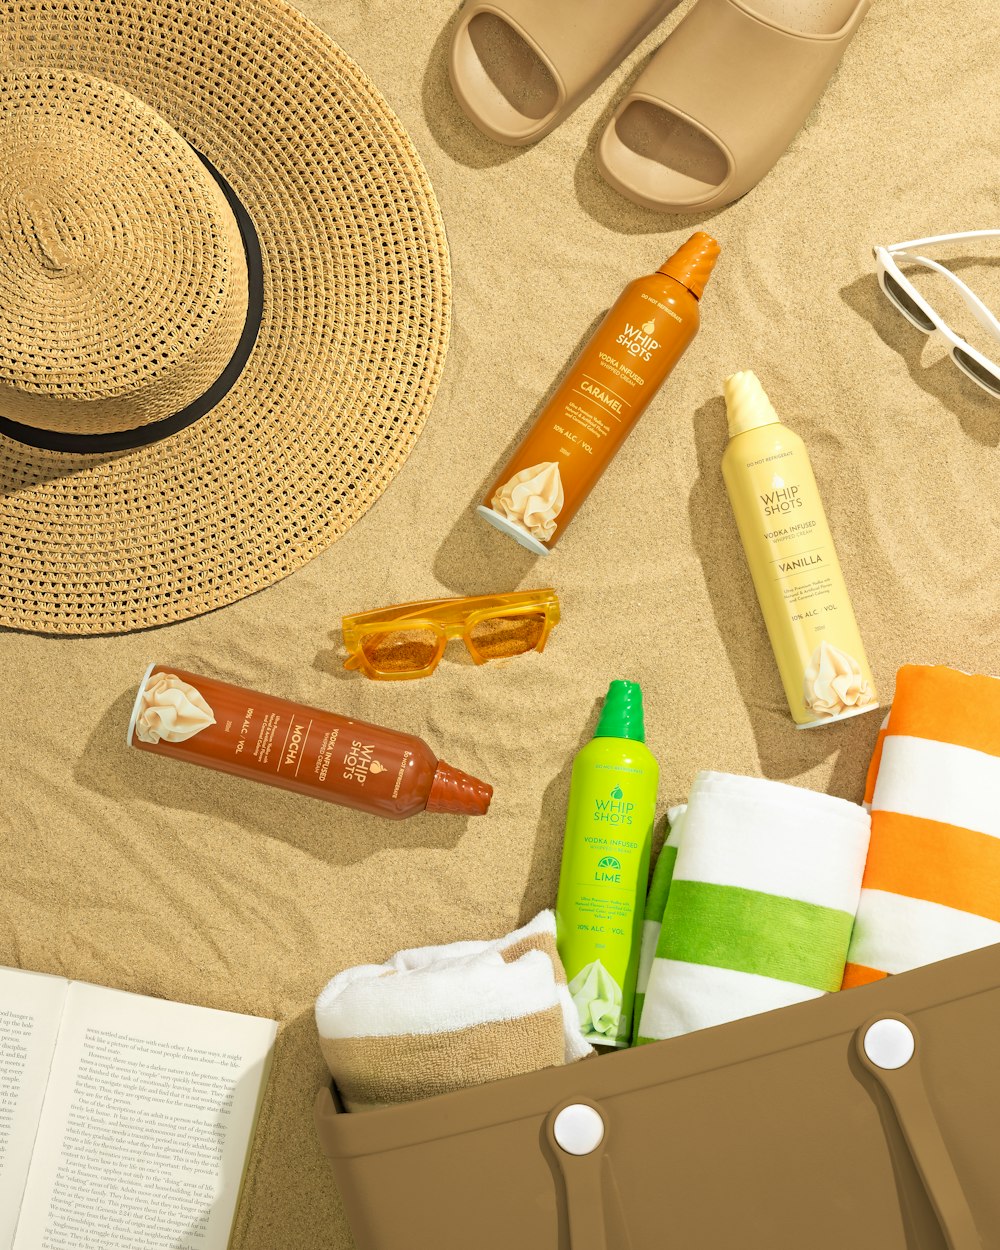 a beach scene with a hat, sunglasses, sunscreen, and other items